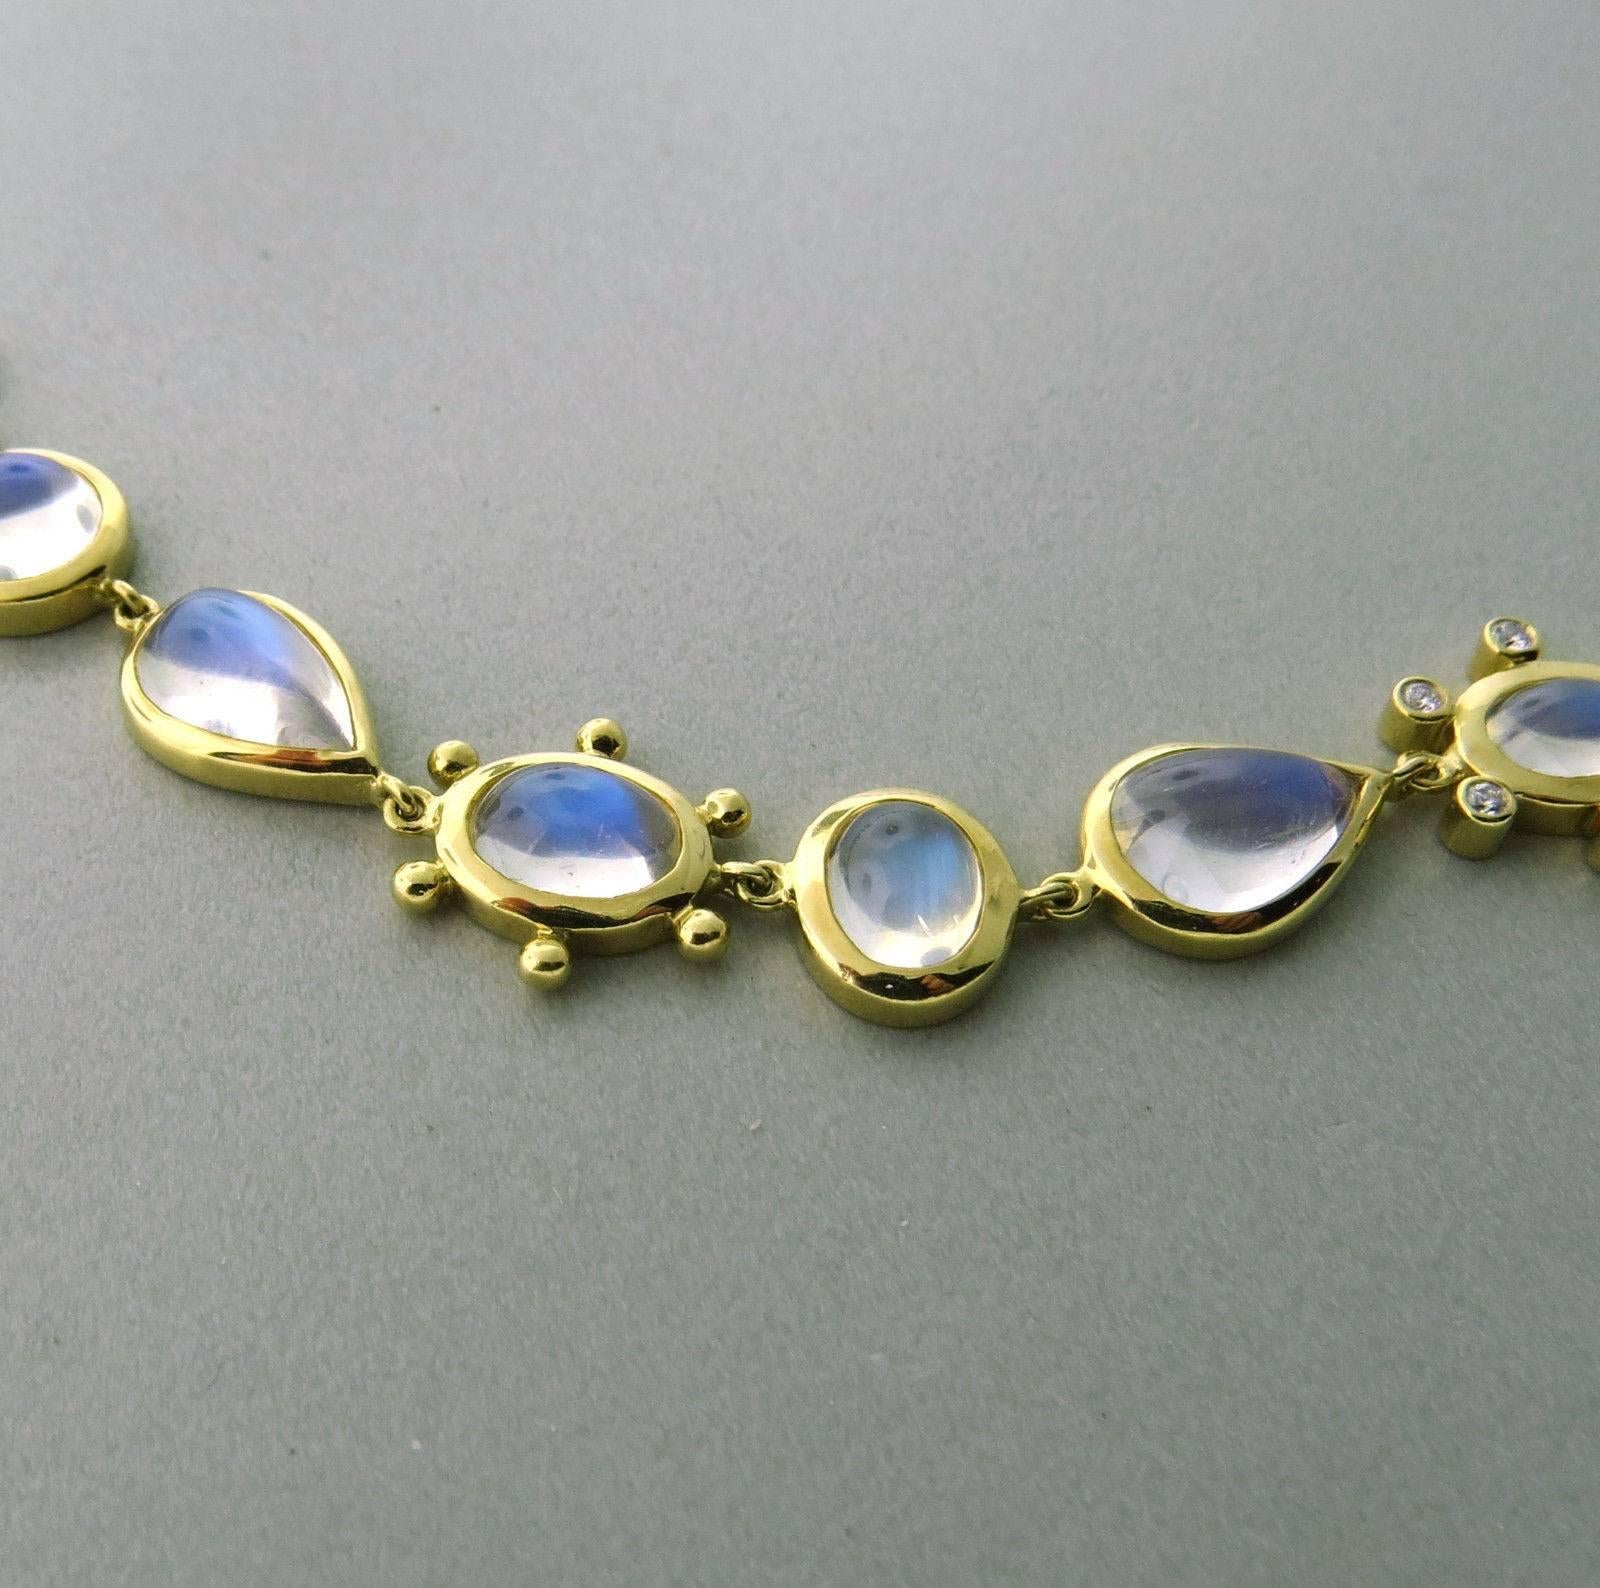 Beautiful 18k gold necklace, crafted by Temple St. Clair, decorated with 58.39ctw in blue moonstones and approximately 0.27ctw in diamonds. Necklace is 19" long and 12mm wide. Marked with Temple mark and 750. Weight of the piece - 50.8 grams